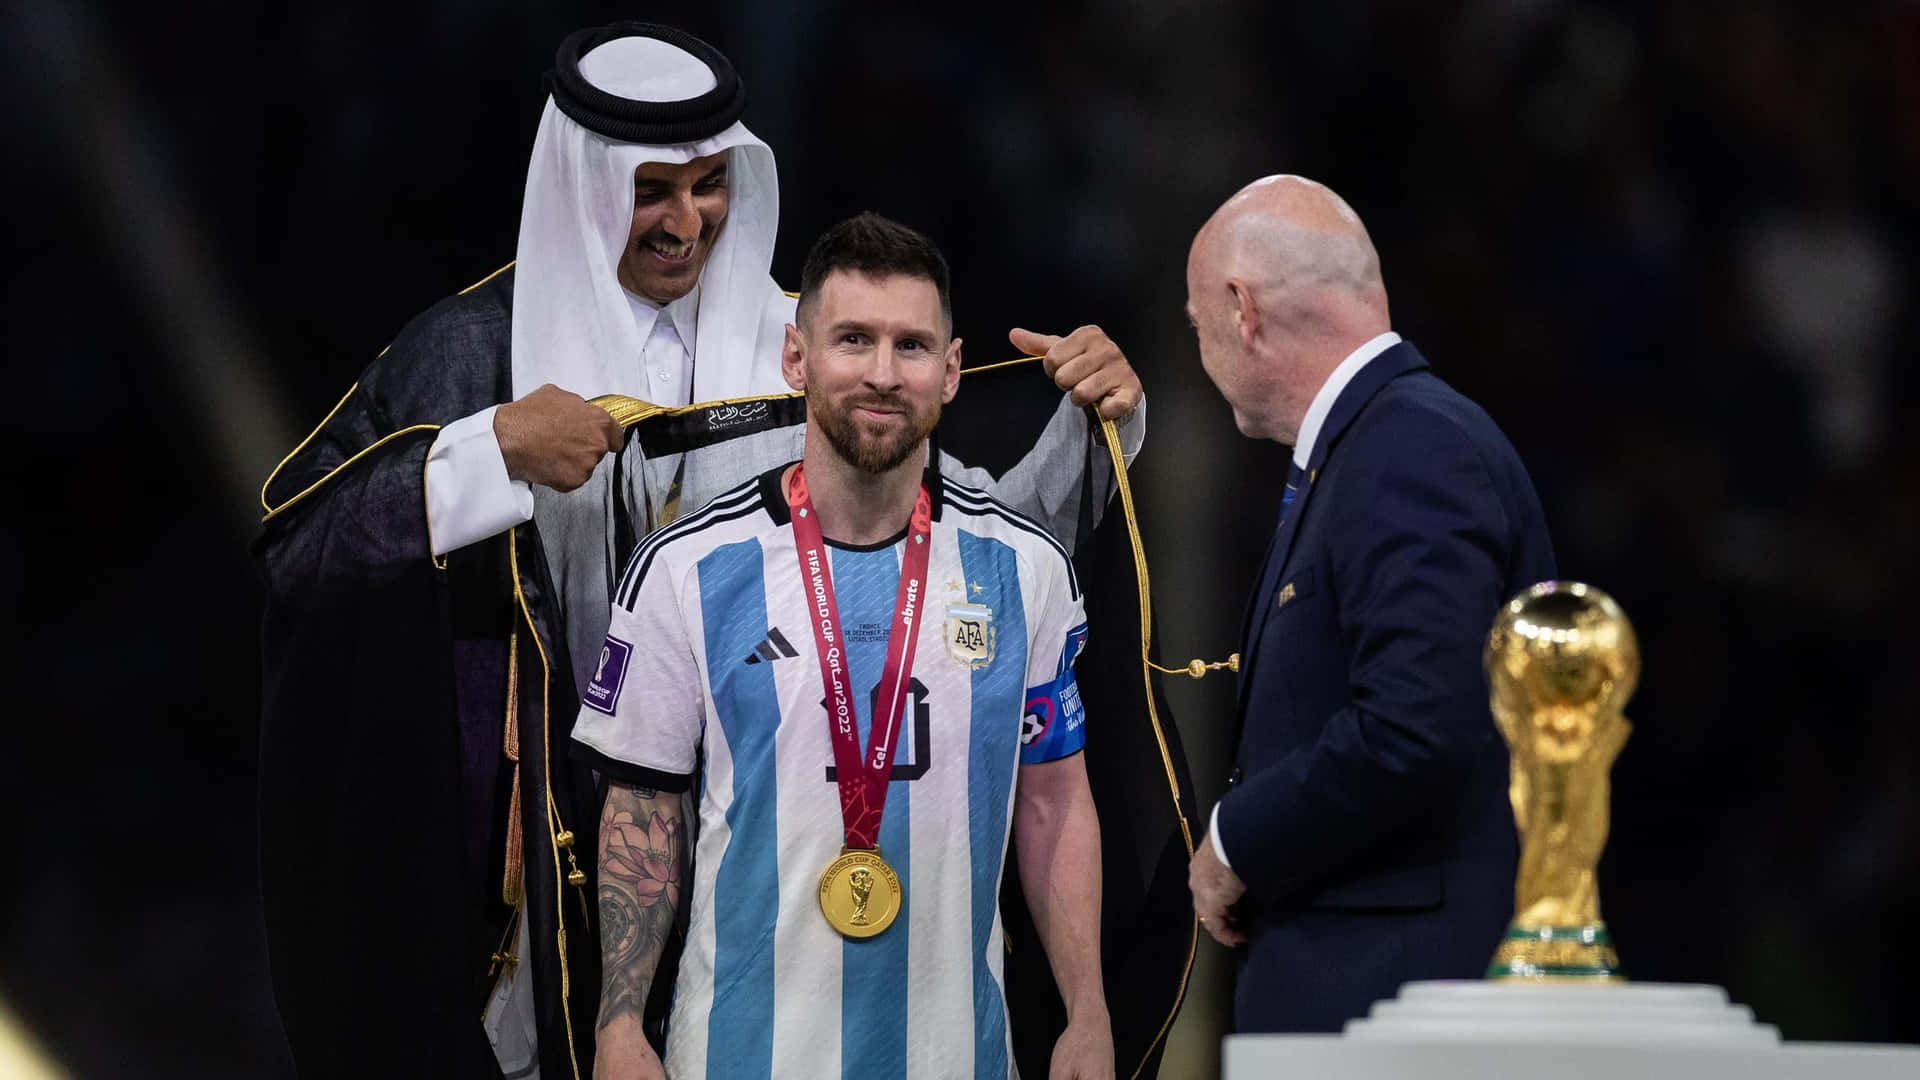 Messi Receiving Medal Ceremony Wallpaper